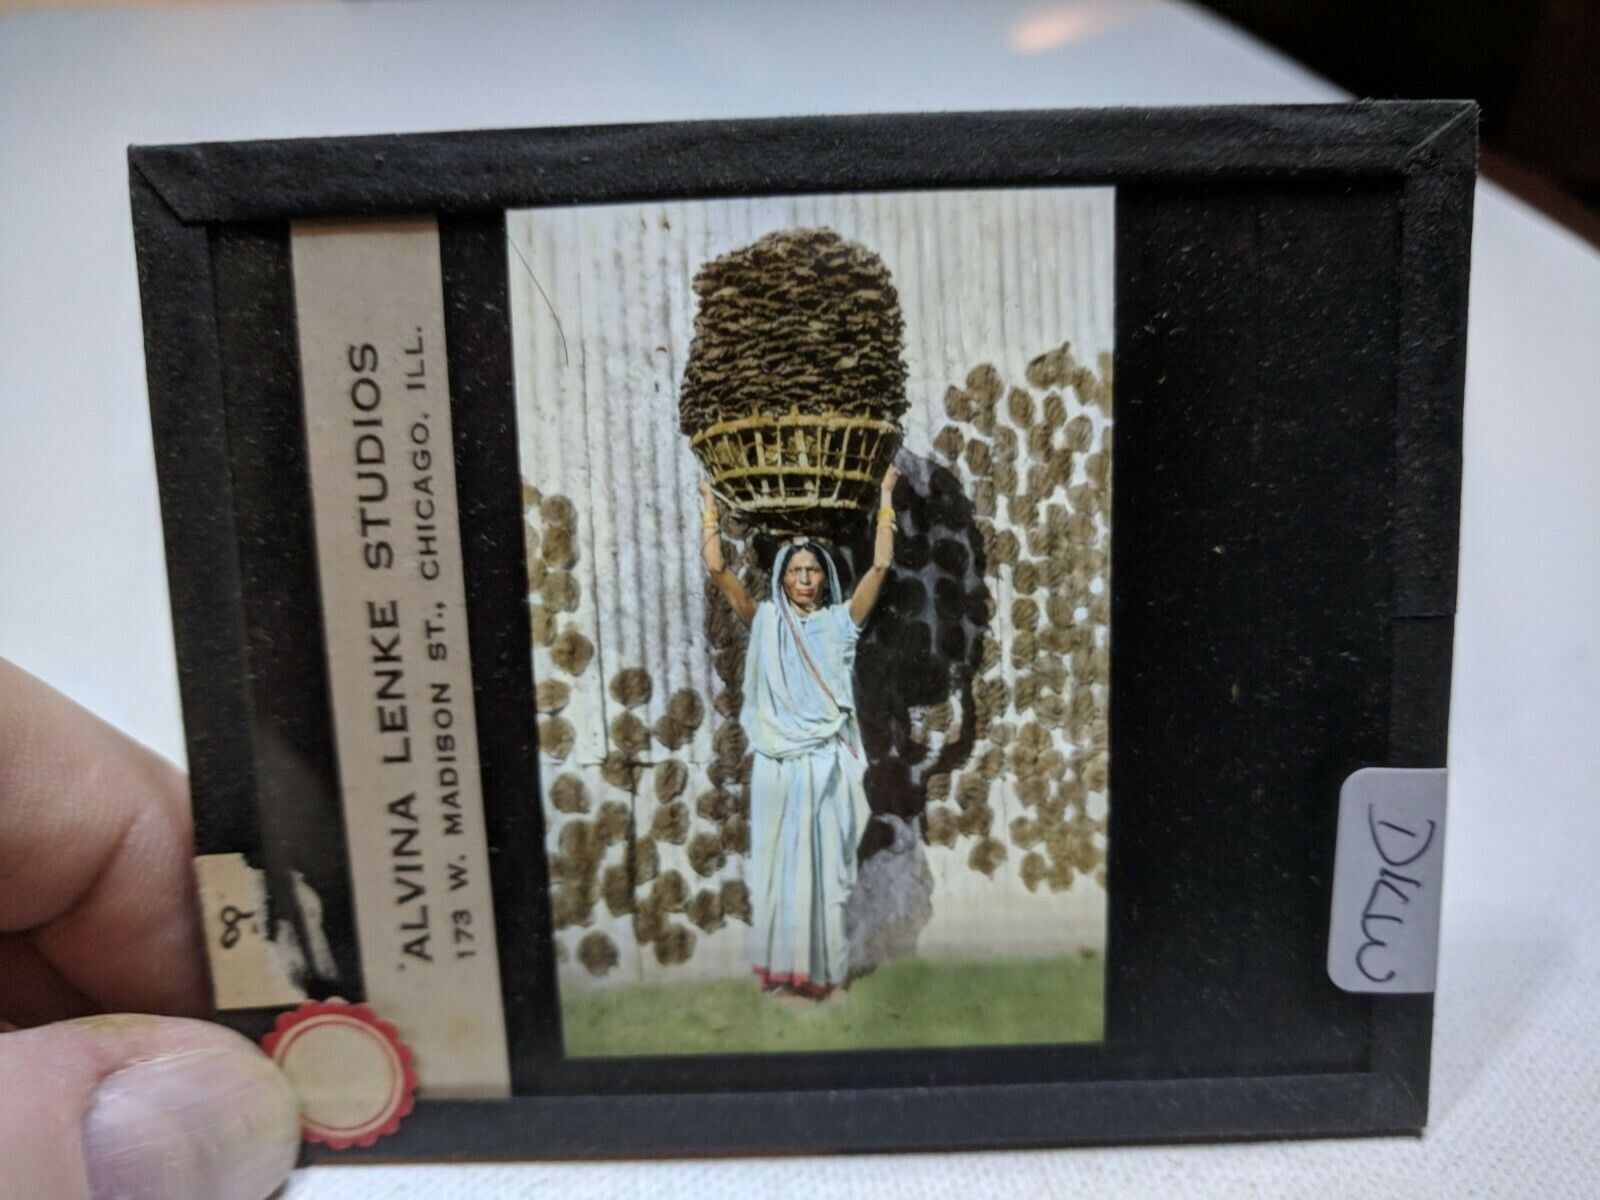 COLORED Glass Magic Lantern Slide DKM WOMAN CARRYING HUGE LOAD ON HER HEAD WOW